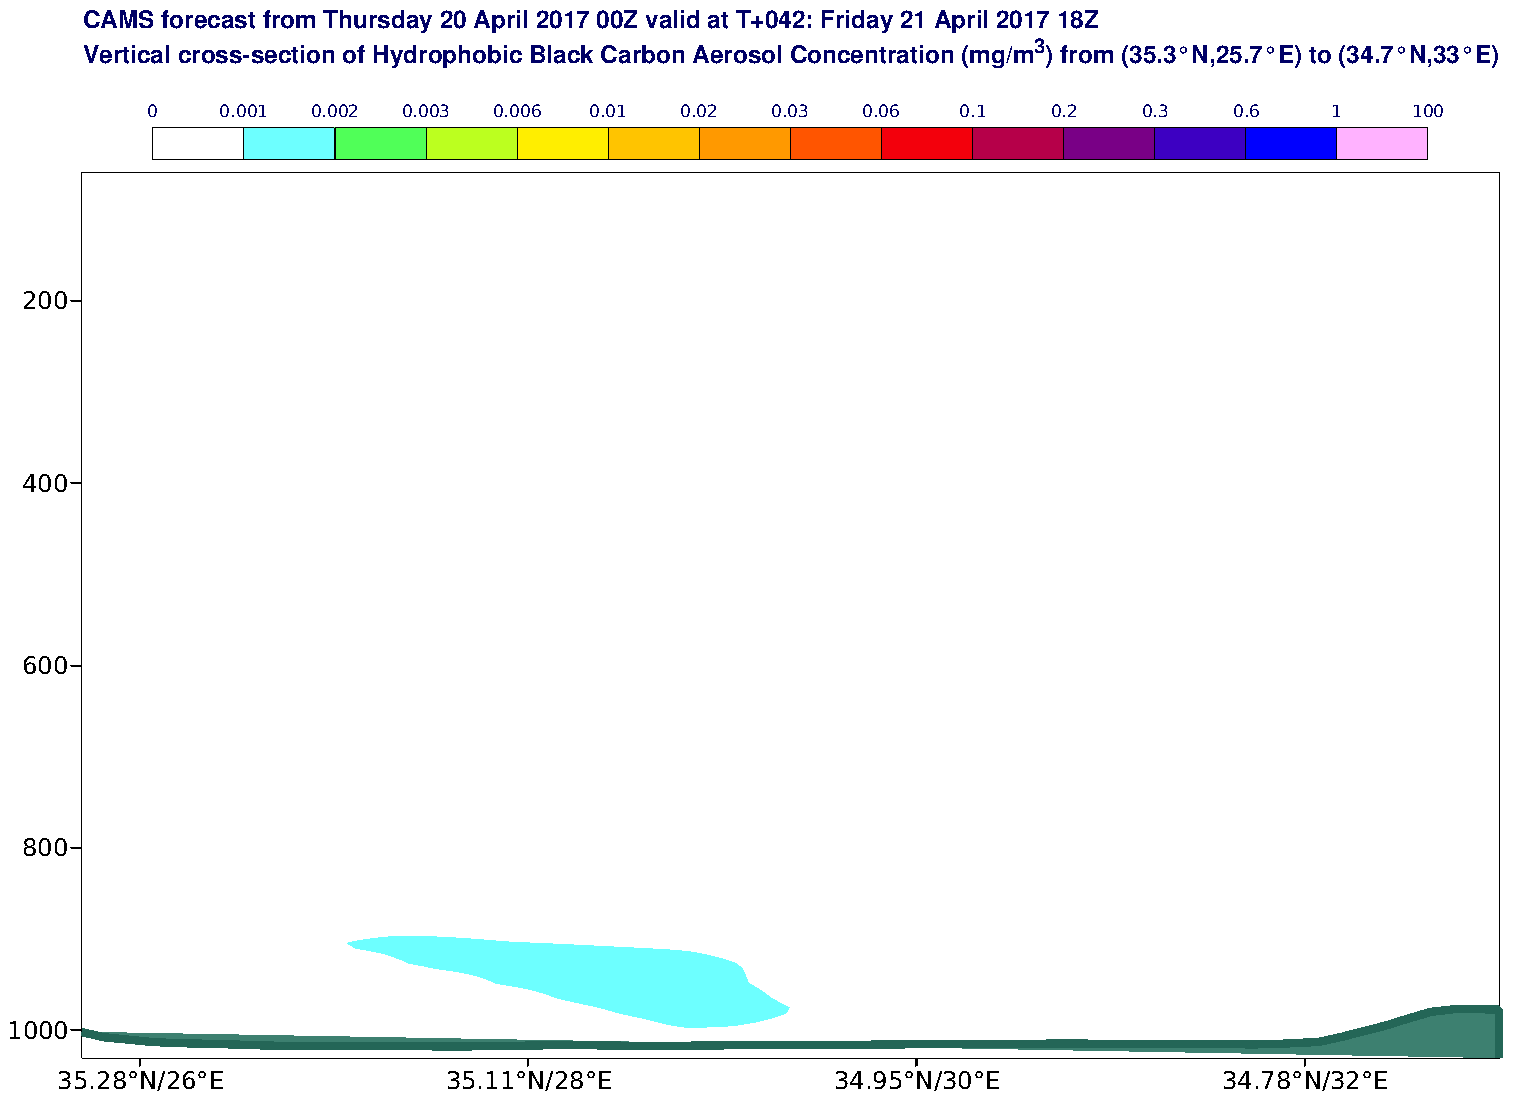 Vertical cross-section of Hydrophobic Black Carbon Aerosol Concentration (mg/m3) valid at T42 - 2017-04-21 18:00